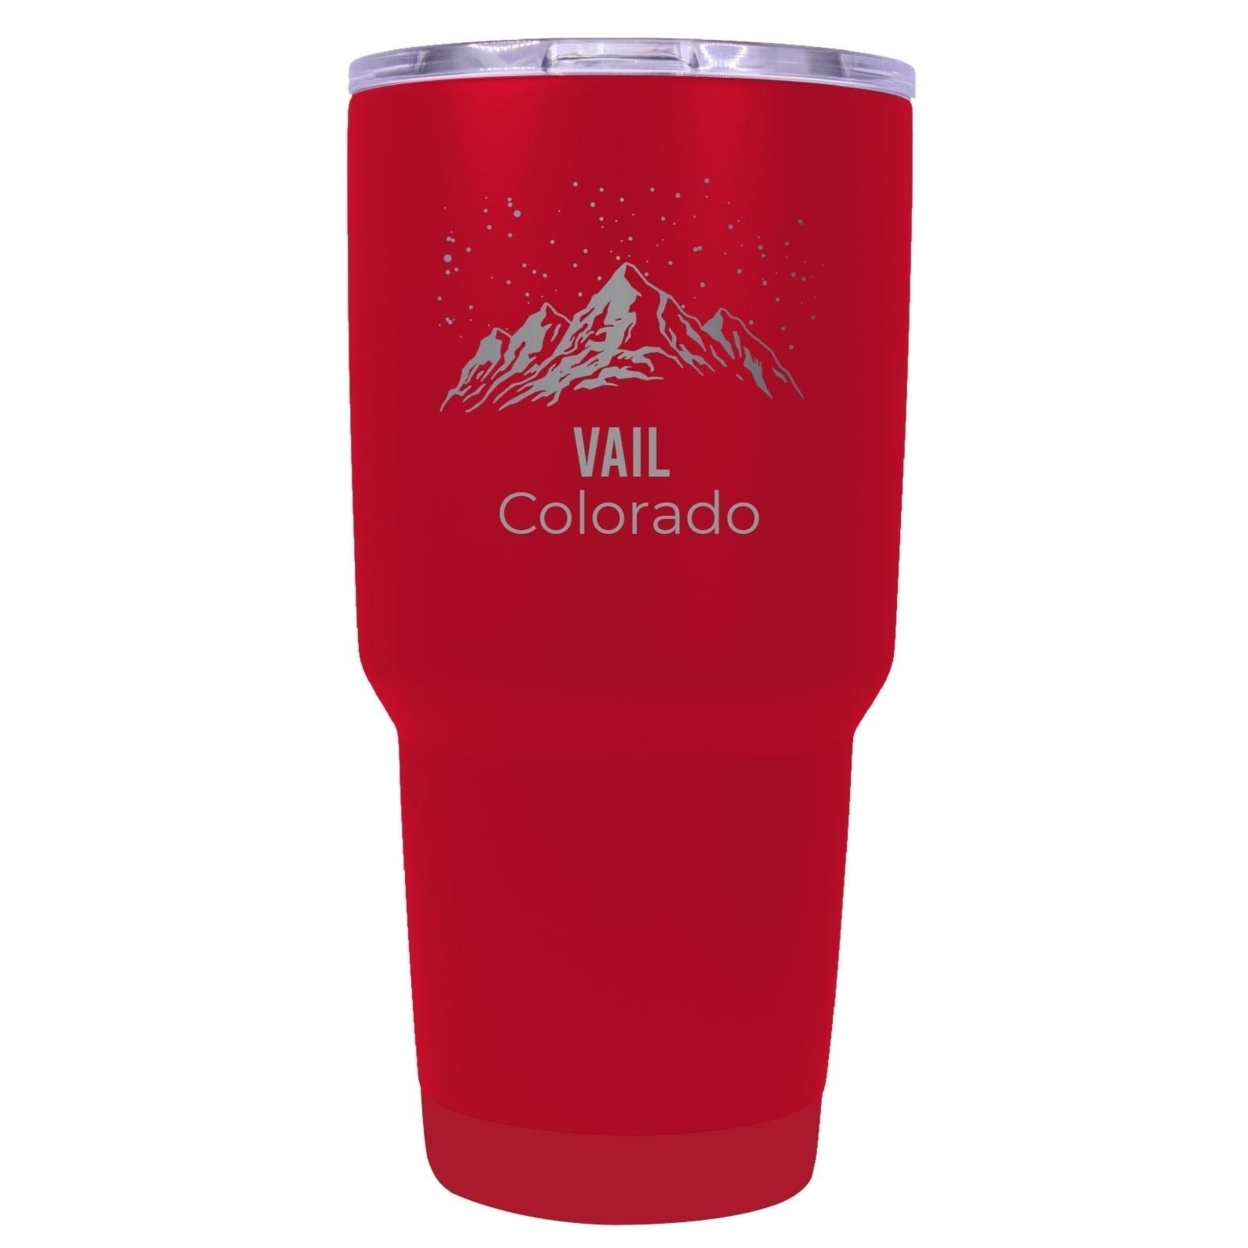 Vail Colorado Ski Snowboard Winter Souvenir Laser Engraved 24 Oz Insulated Stainless Steel Tumbler - Red